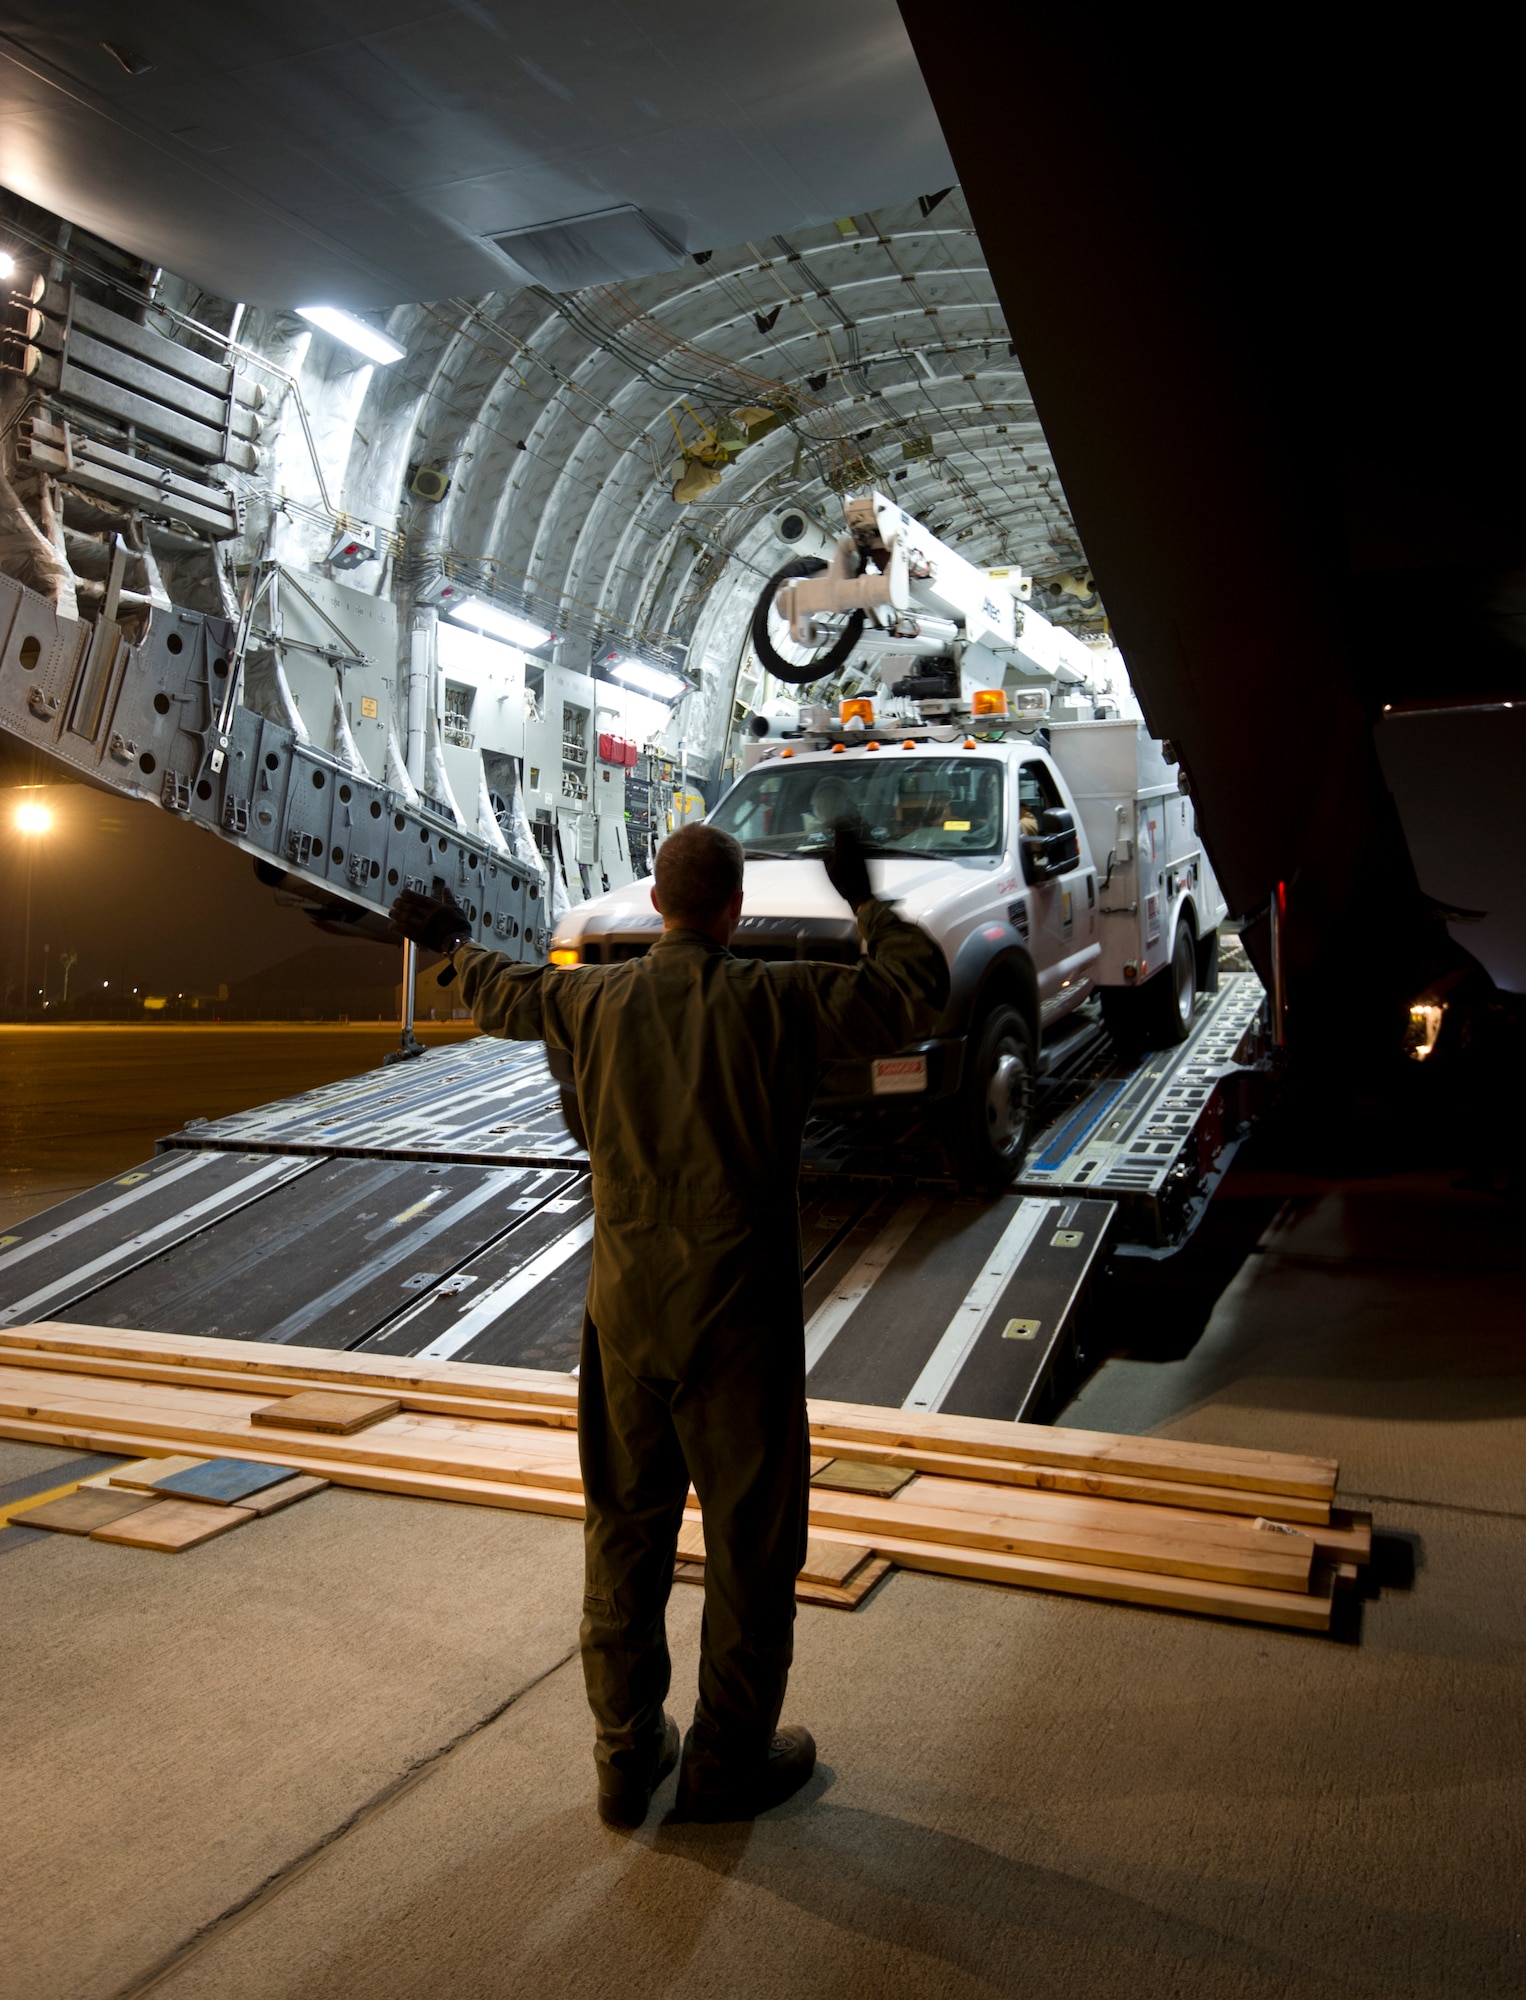 Tech. Sgt. Jeffrey Burke, 137th Airlift Squadron loadmaster, directs a Southern California Edison utility vehicle as it is loaded onto a C-17 Globemaster III at March Air Reserve Base, Calif., Nov. 1, 2012. Military bases across the nation are mobilizing to the northeast region of the country to restore electricity and provide humanitarian assistance, as currently more than two million people are without power. (U.S. Air Force photo/Staff Sgt. Caroline Hayworth)